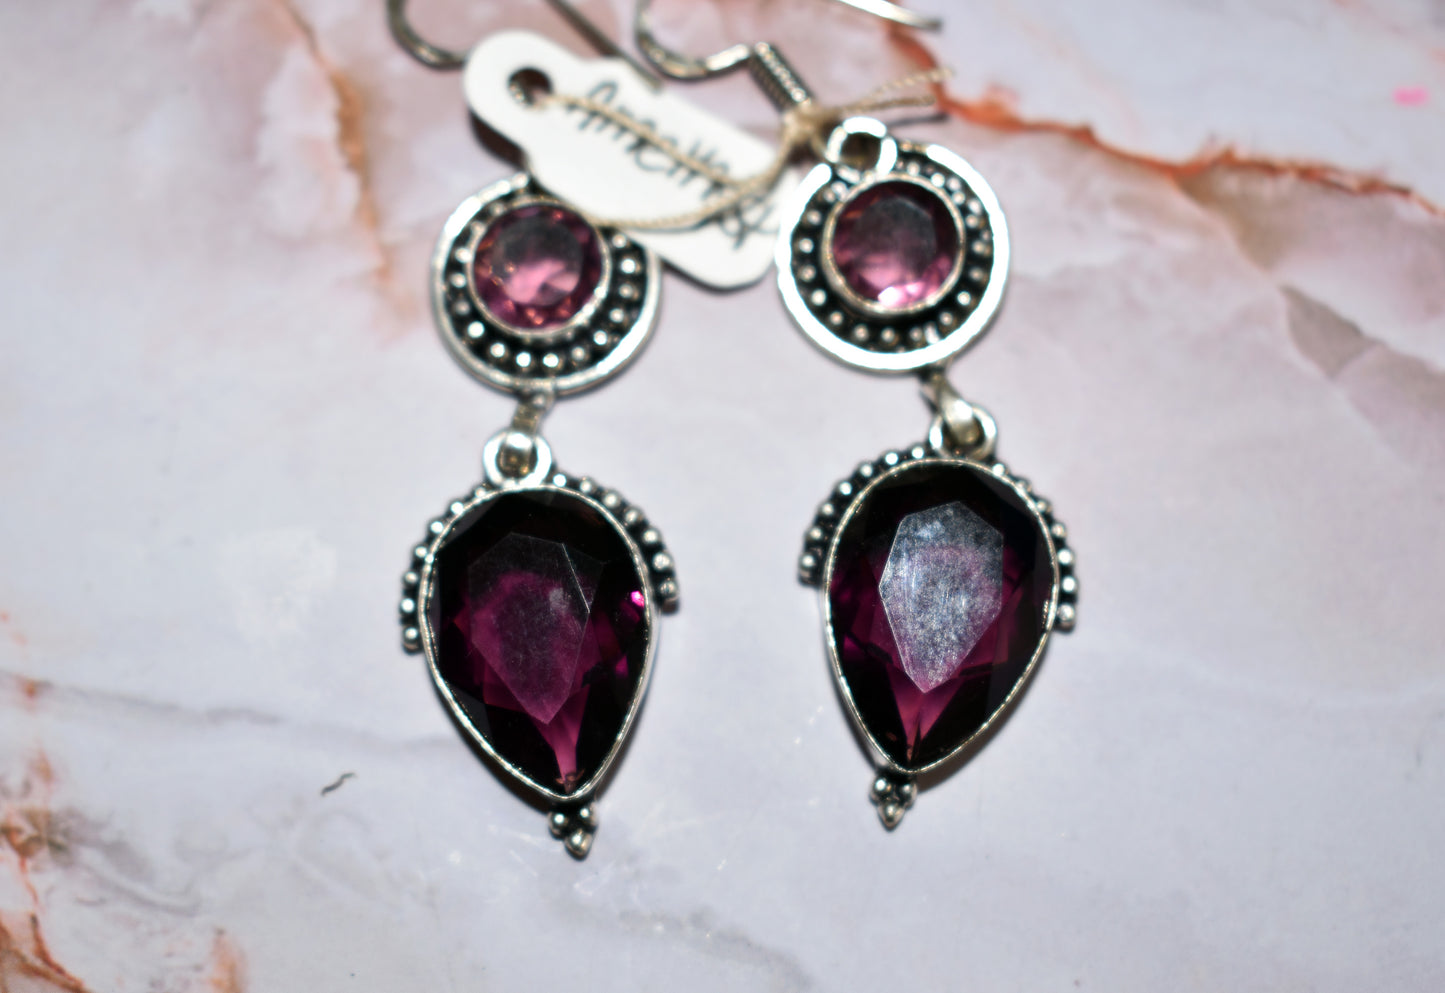 stones-of-transformation - Amethyst Two Stone Earrings - Stones of Transformation - 